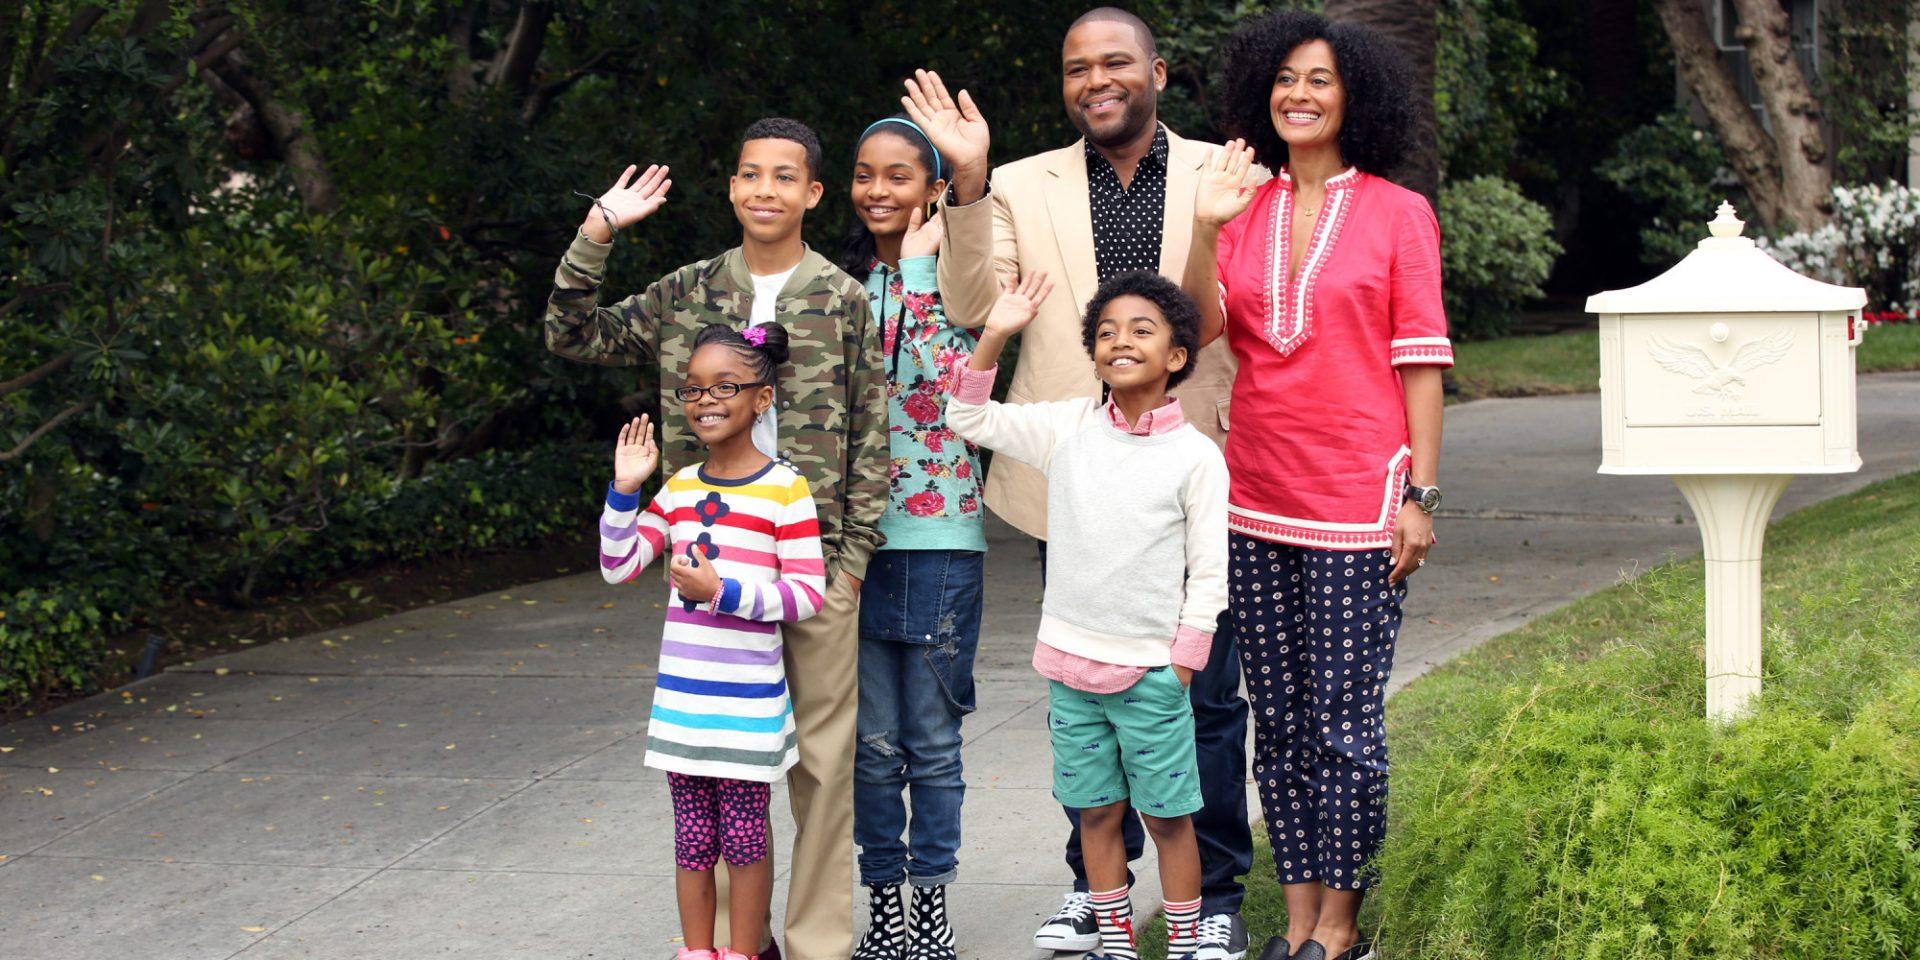 BLACK-ISH+-+ABCs+new+family+comedy%2C+black-ish%2C+takes+a+fun+yet+bold+look+at+one+mans+determination+to+establish+a+sense+of+cultural+identity+for+his+family.+The+series+stars+Anthony+Anderson%2C+Tracee+Ellis+Ross+and+special+guest+star+Laurence+Fishburne.+%28ABC%2FAdam+Taylor%29%0A